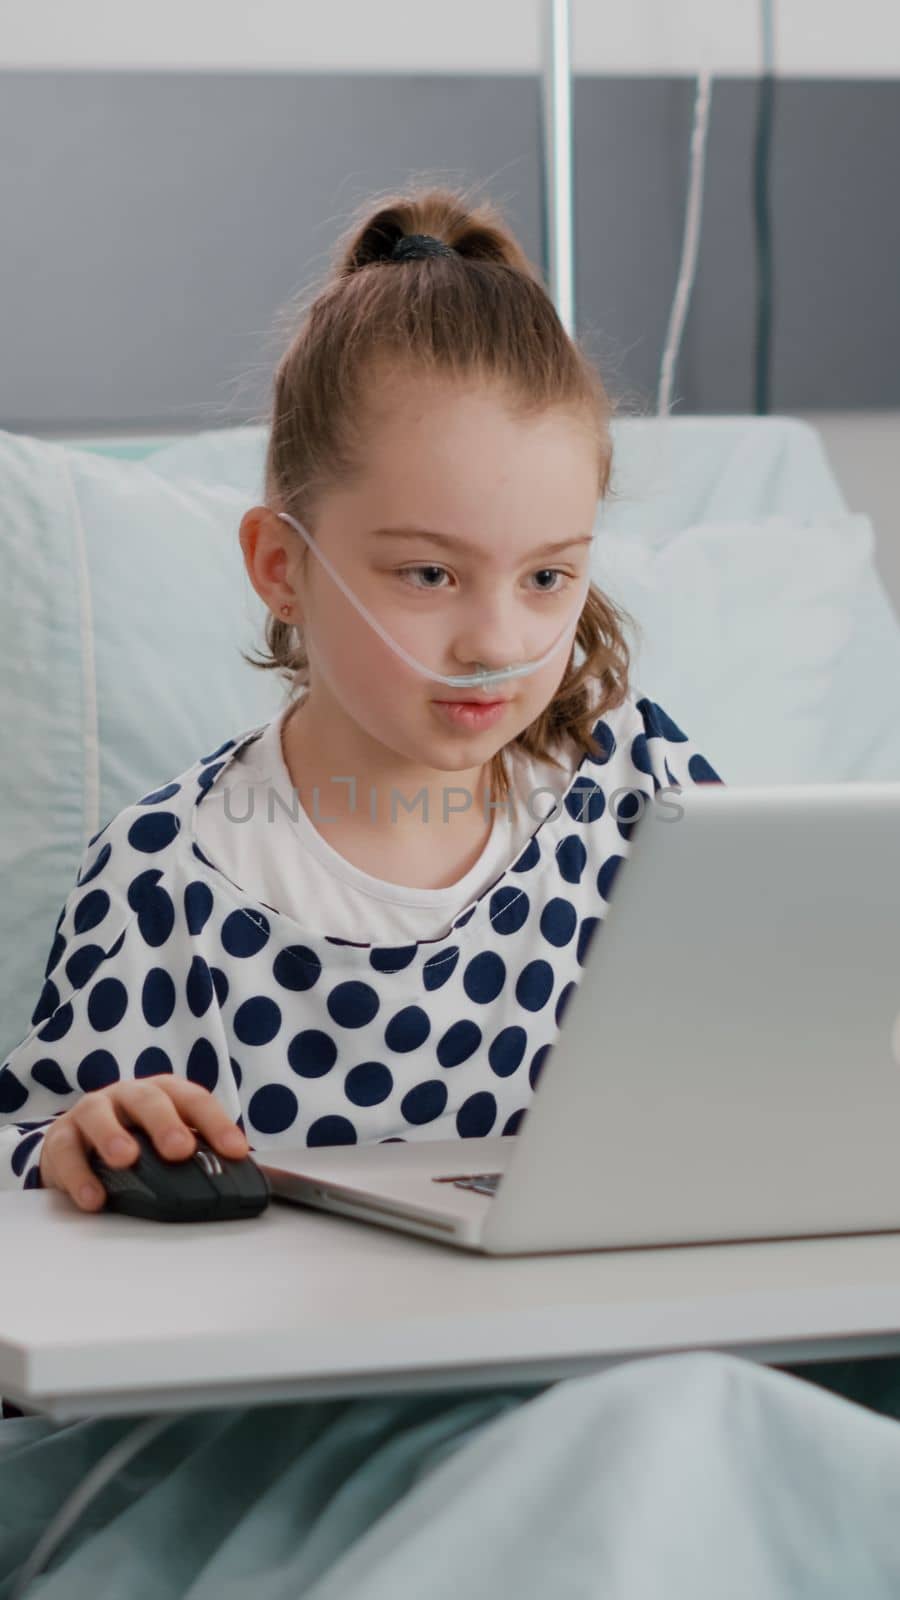 Hospitalized sick girl playing online videogames using laptop computer by DCStudio